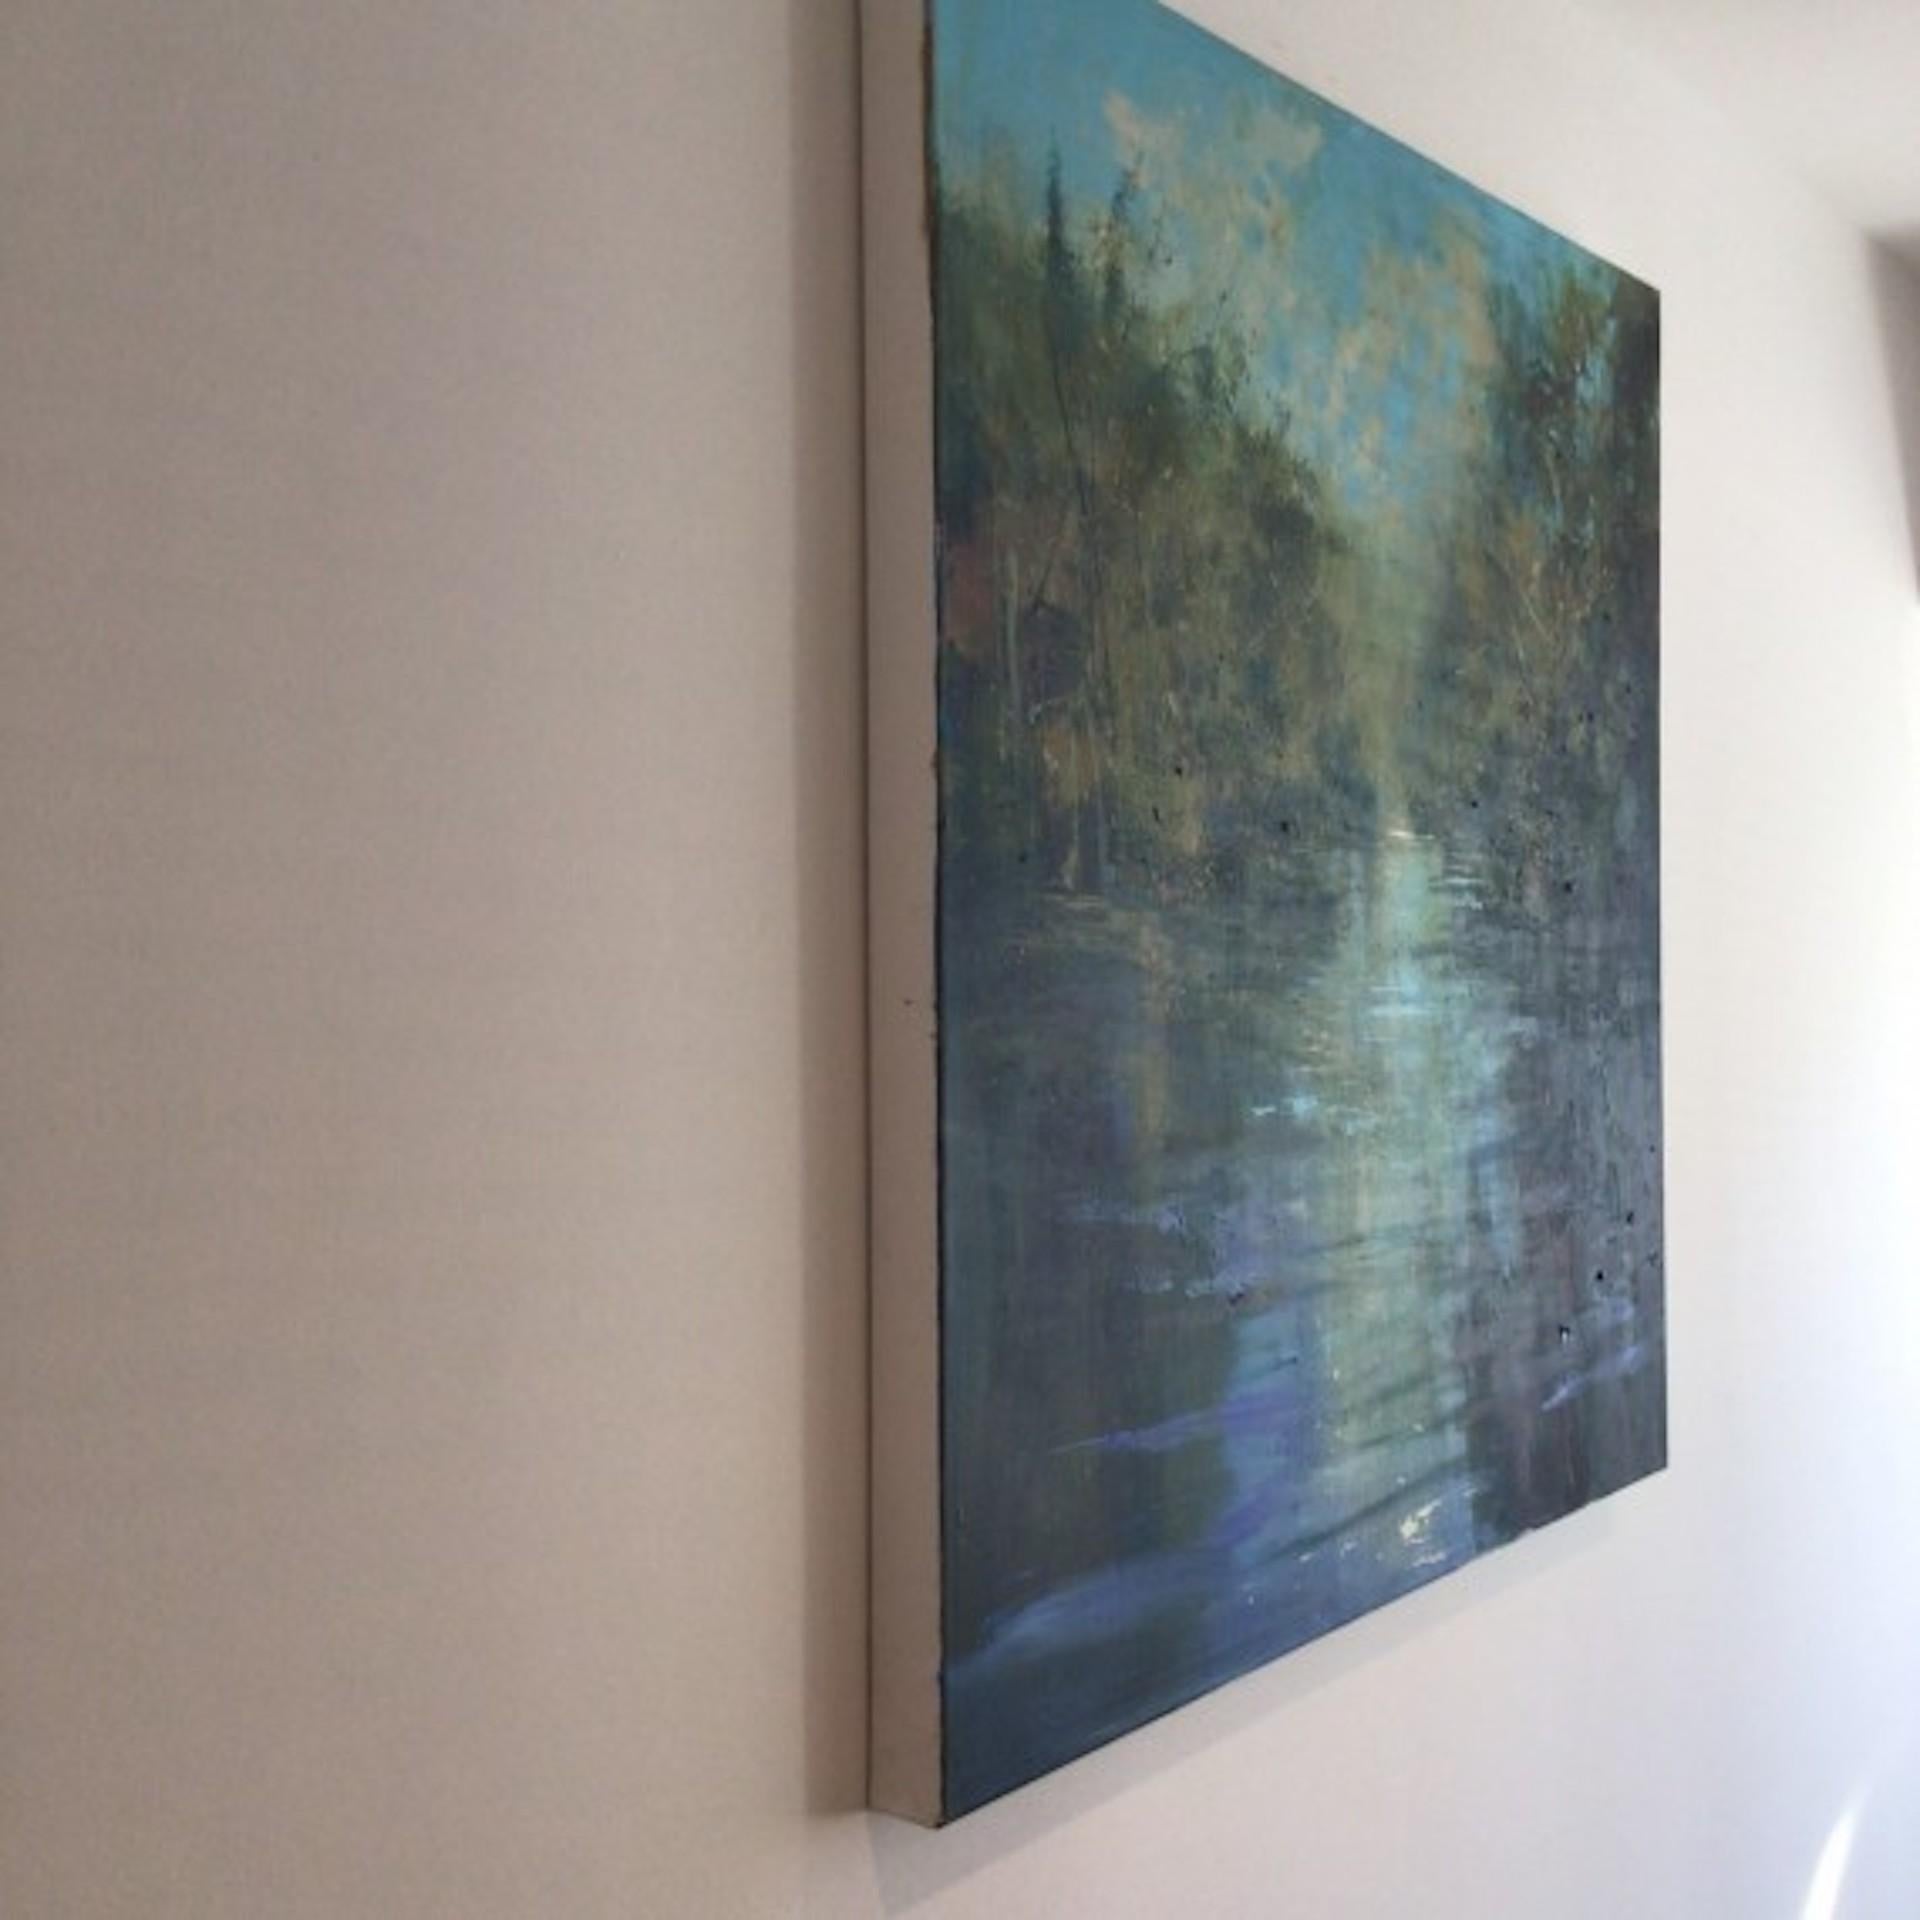 River Silence [2021]
Original
Landscape
Oil and Acrylic
Canvas Size: H:80 cm x W:80 cm x D:3.5cm
Sold Unframed
Please note that insitu images are purely an indication of how a piece may look

River Silence is a beautiful evocation of a river on a